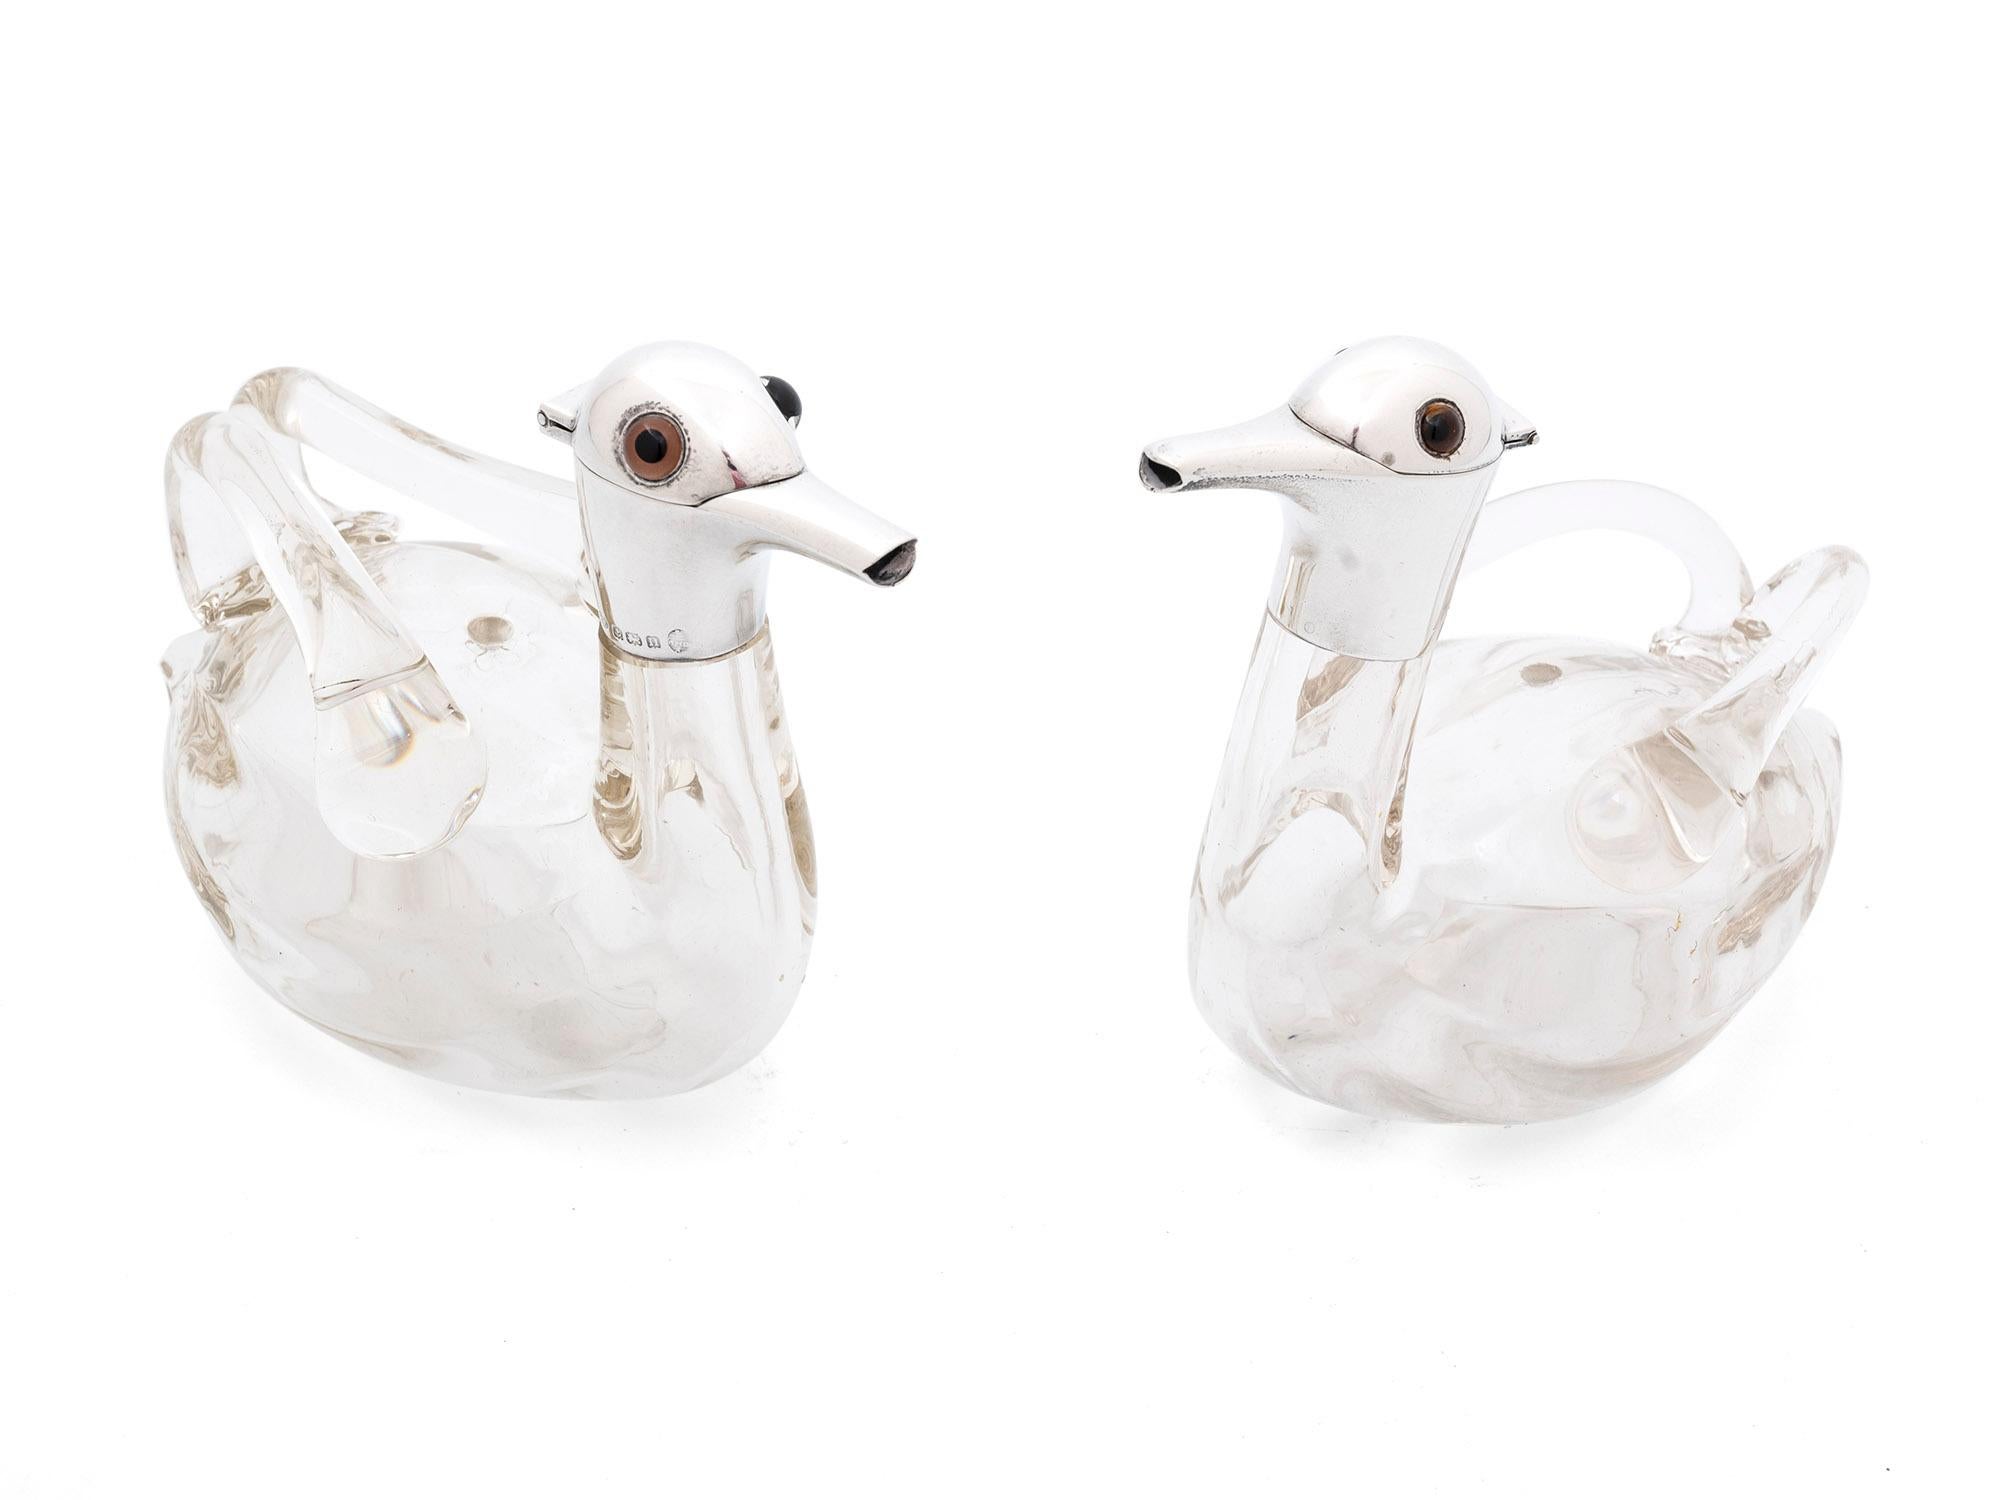 This twin pair of glass duck decanters would have been used for storing liqueur. With shining Sterling Silver tops, these charming little Duck Decanters are complete with some lovely features.

Each Decanter is in the form of an elegant duck; they